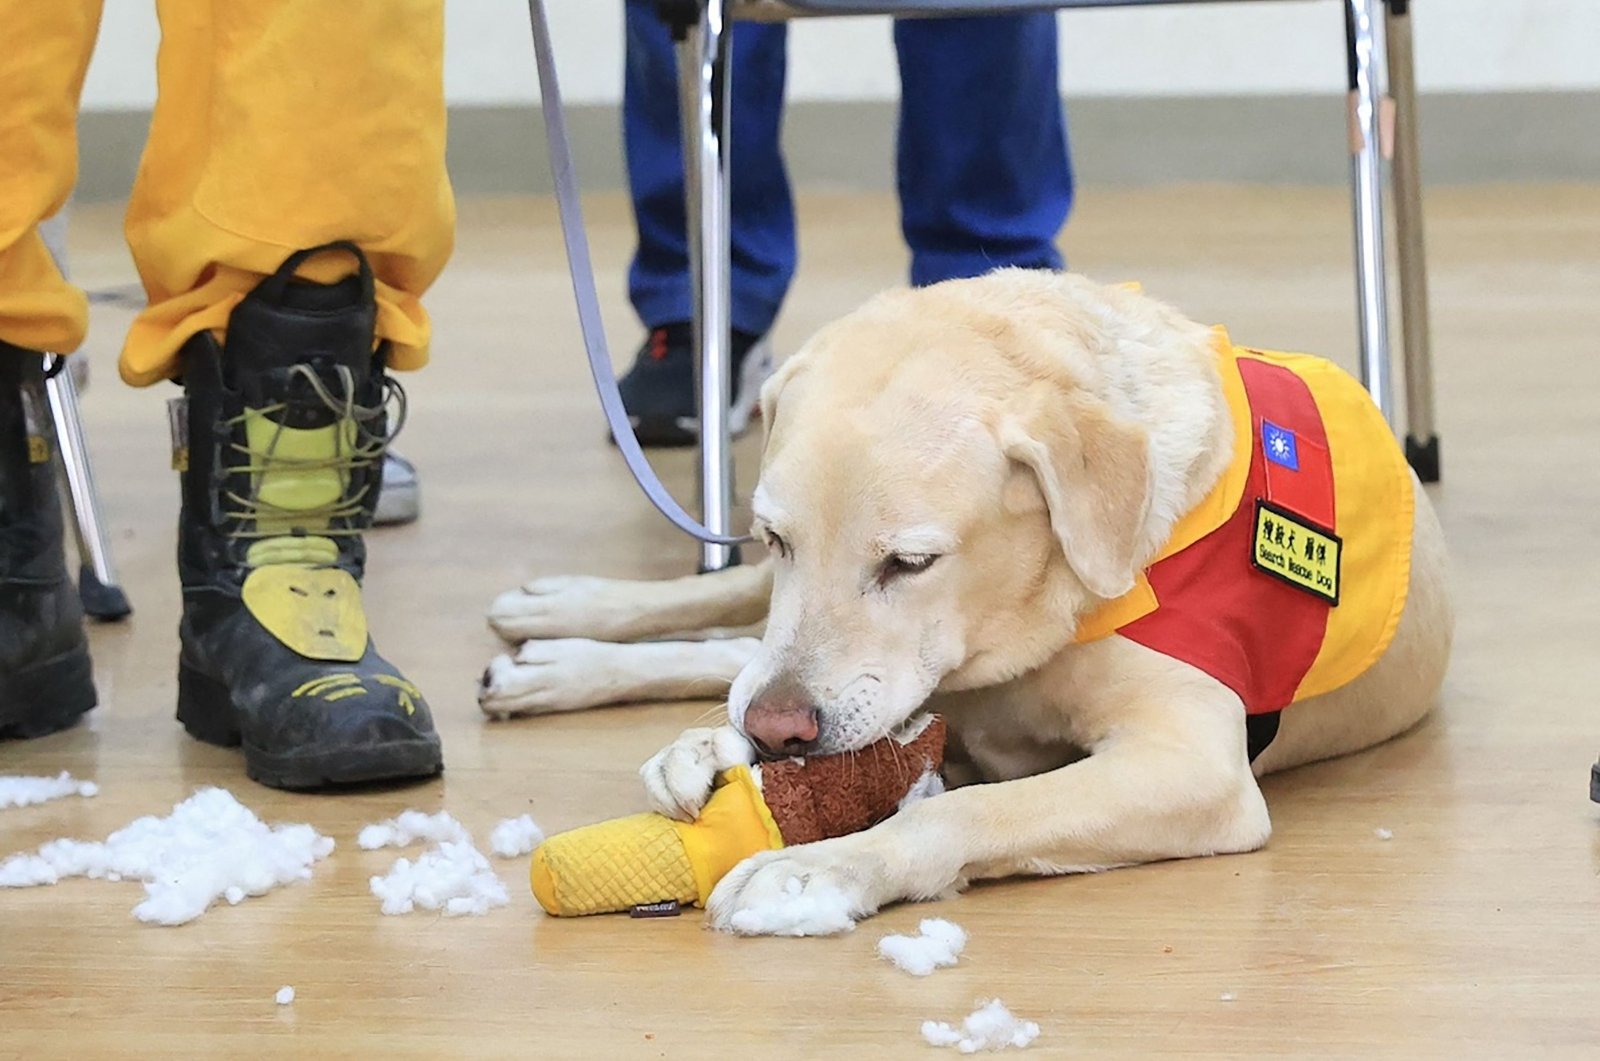 Roger, an eight-year-old labrador, plays before heading out for a search and rescue mission in Hualien, three days after the magnitude-7.4 earthquake hit the region, Taiwan, April 6, 2024. (AFP Photo)